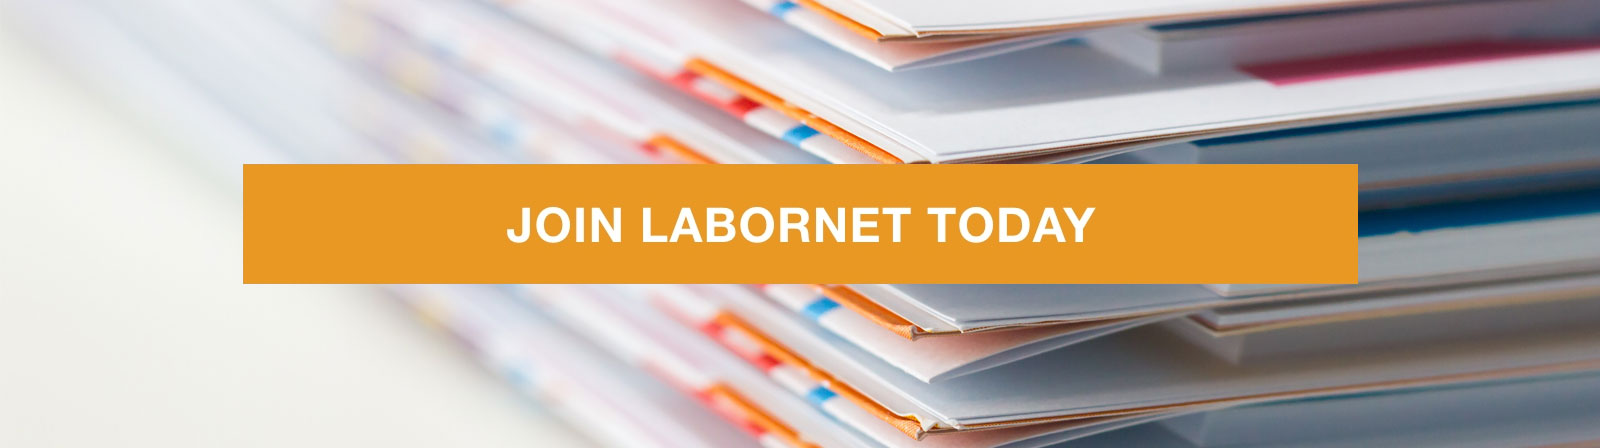 Join Labornet Today